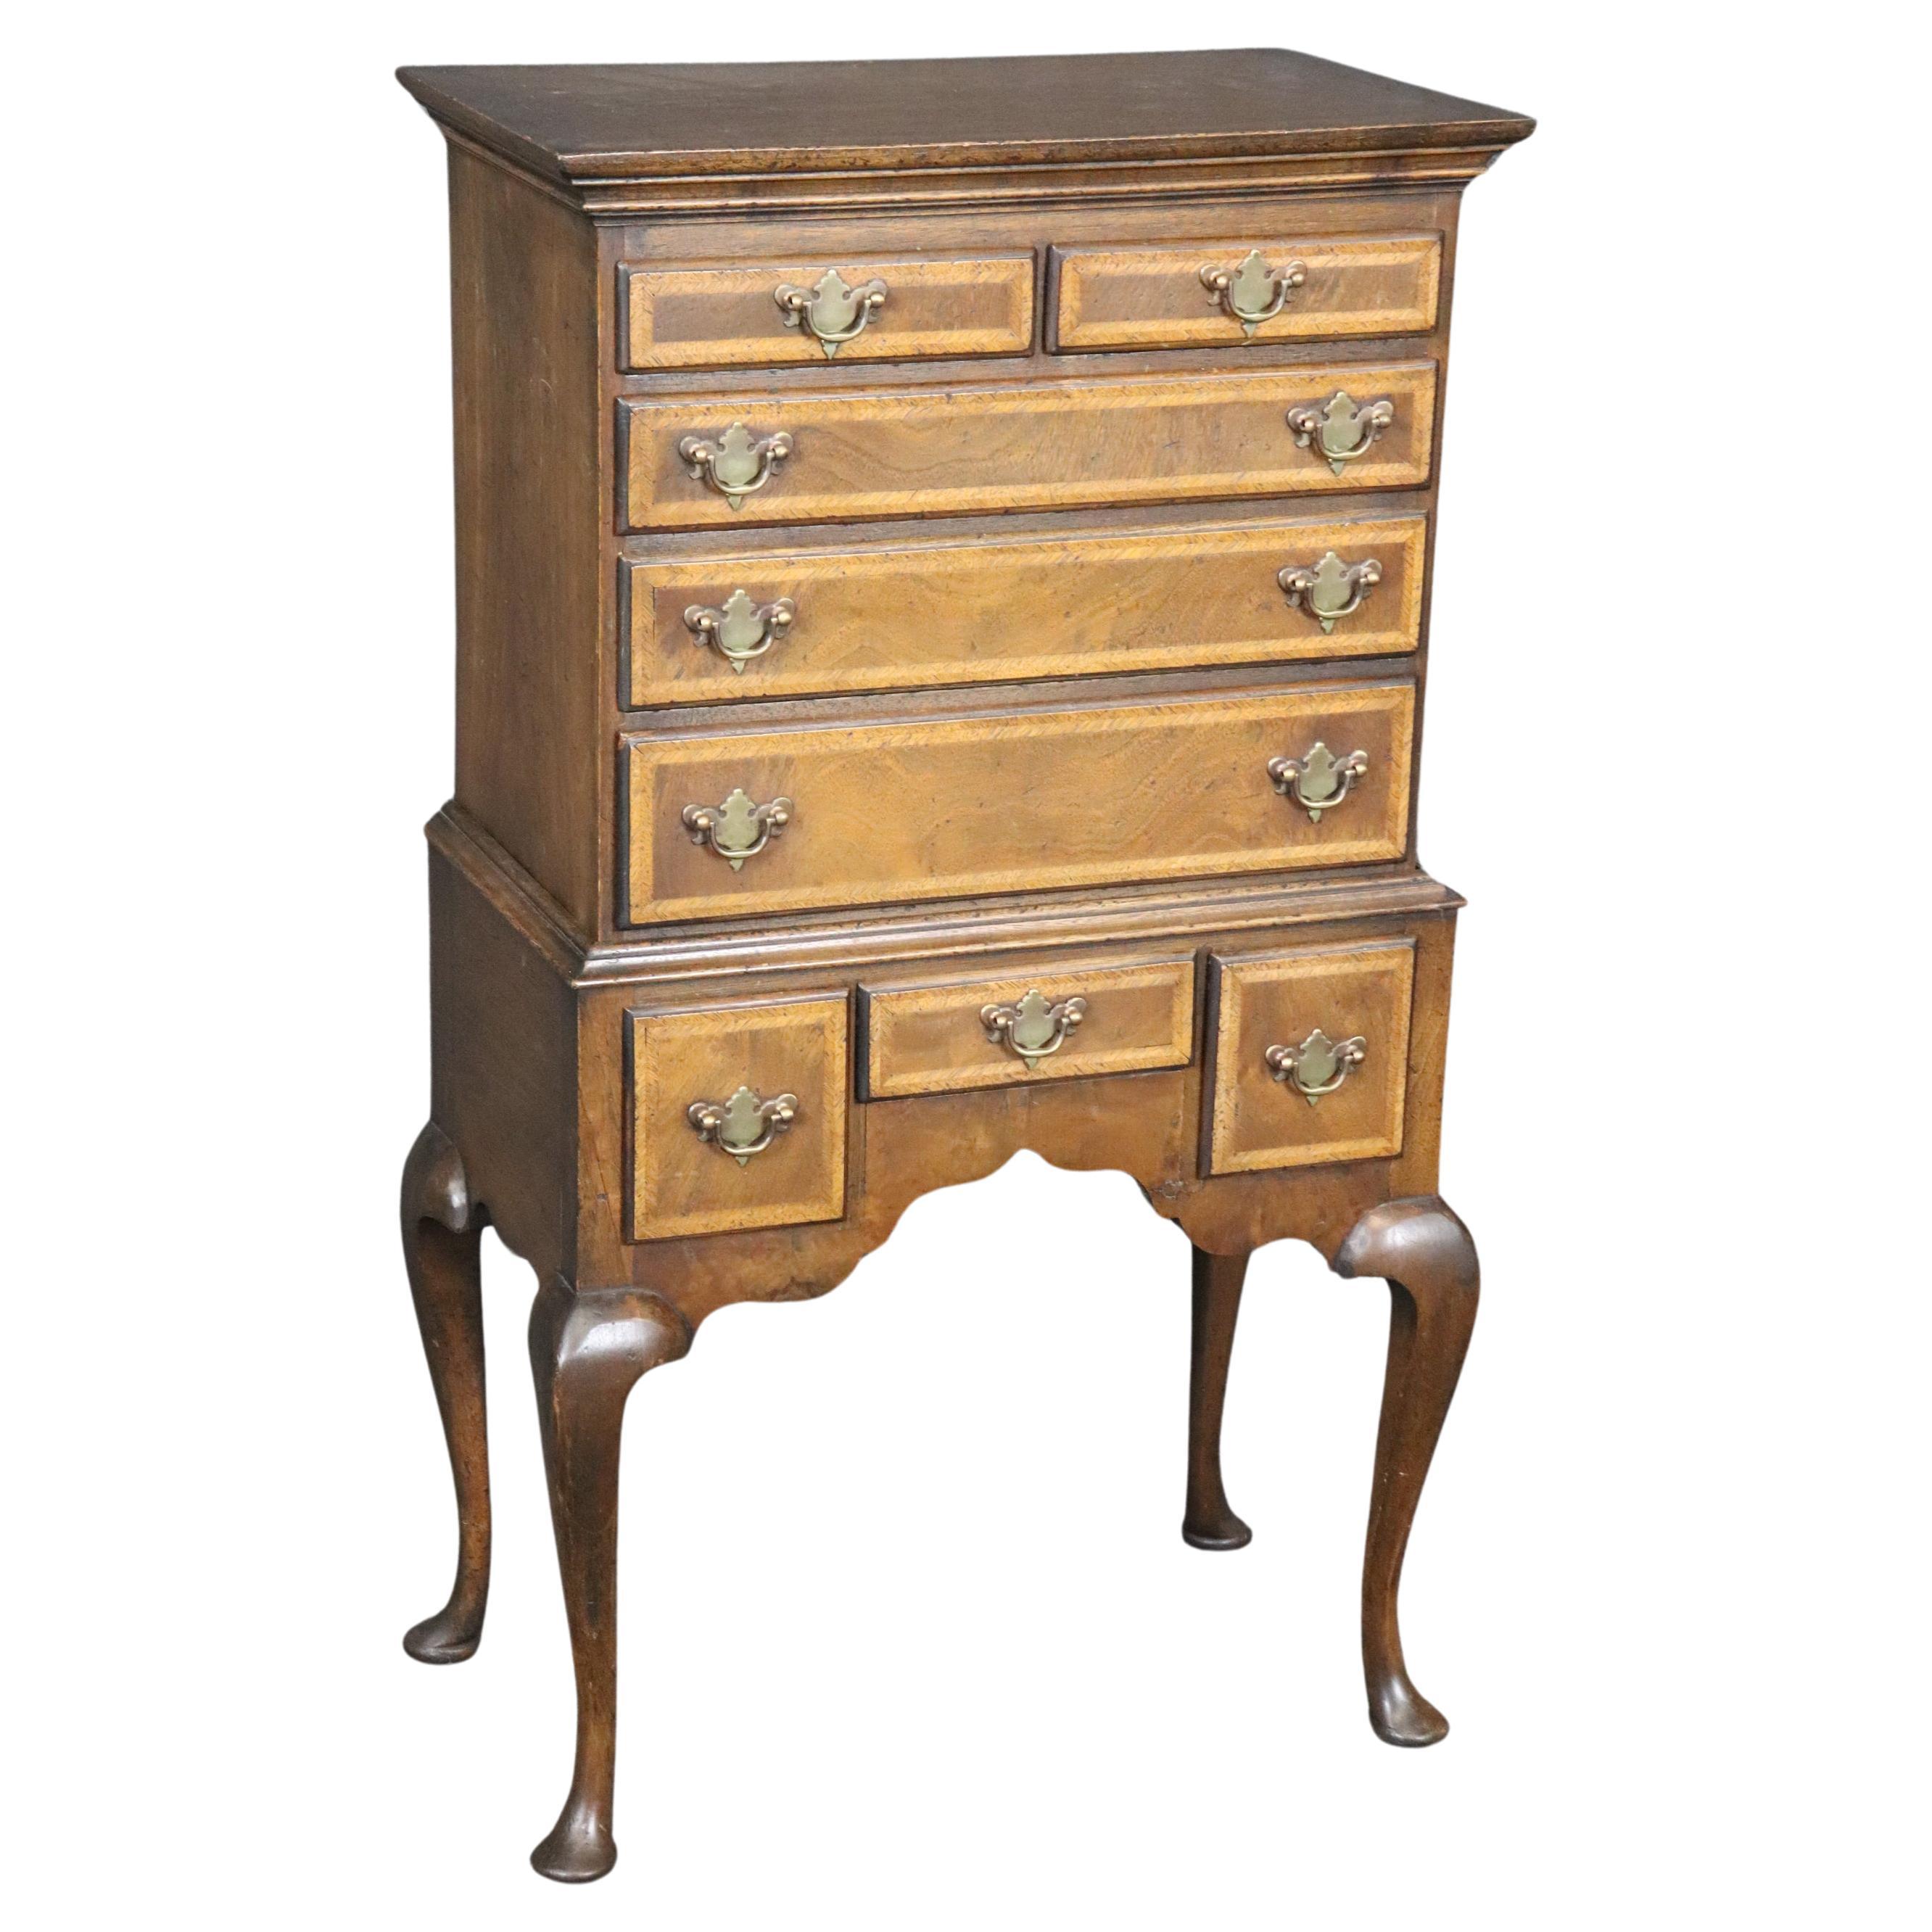 Petite Under 3 Ft Tall Queen Anne Banded Walnut Lingerie Chect or Cabinet For Sale